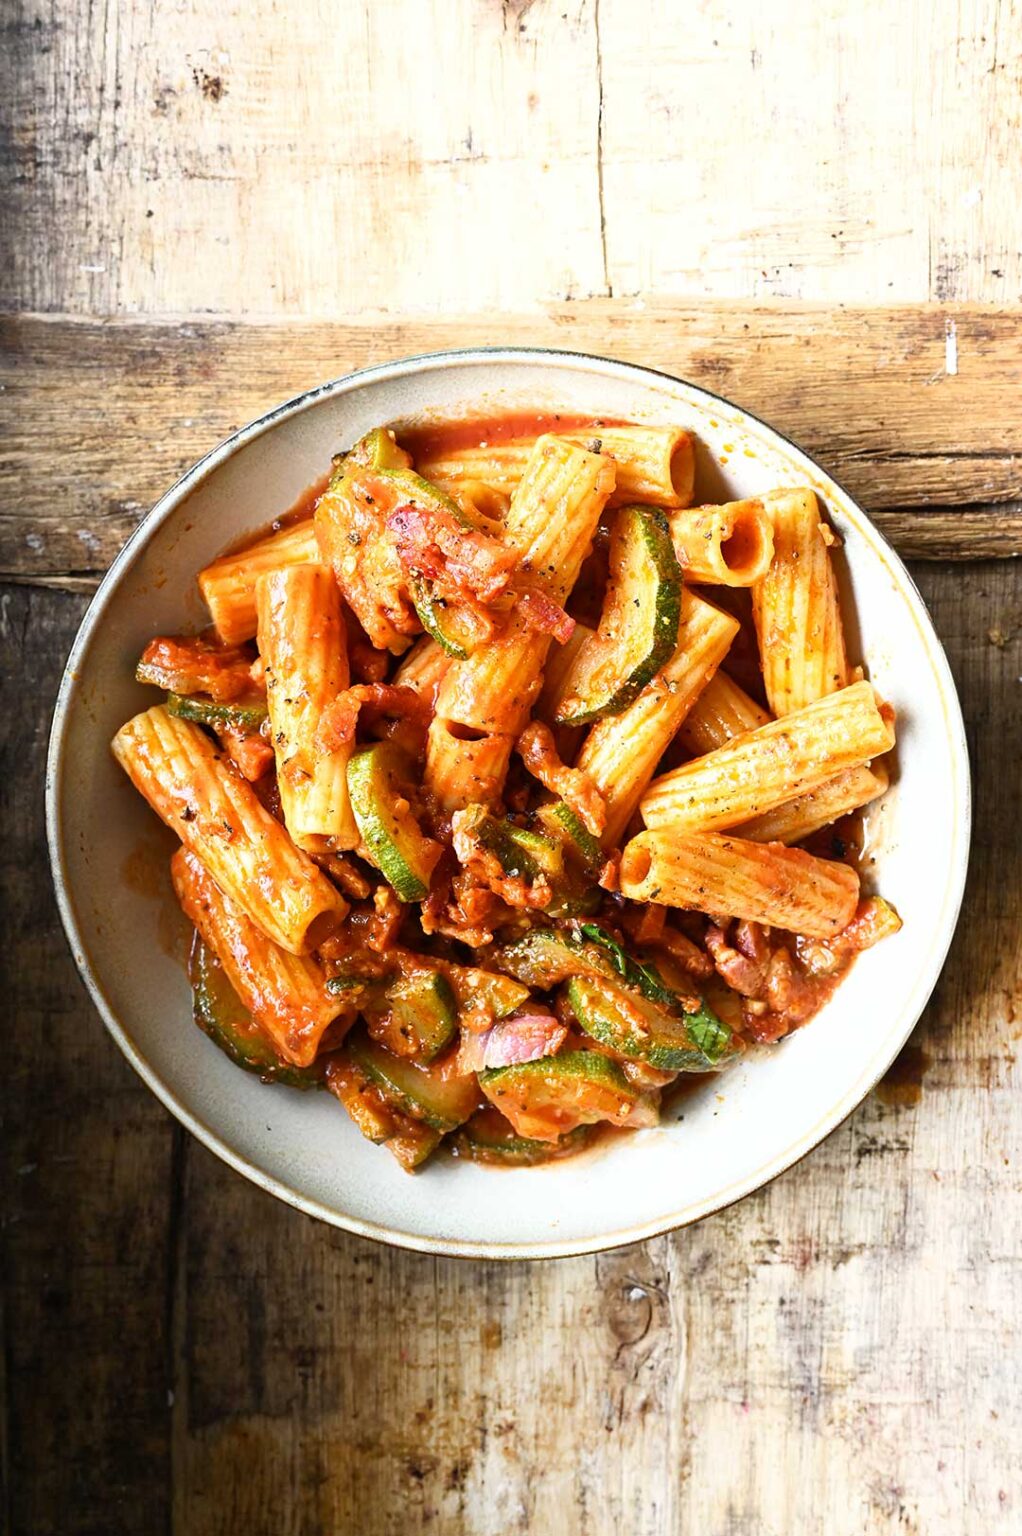 Rigatoni with Zucchini and Bacon - Serving Dumplings